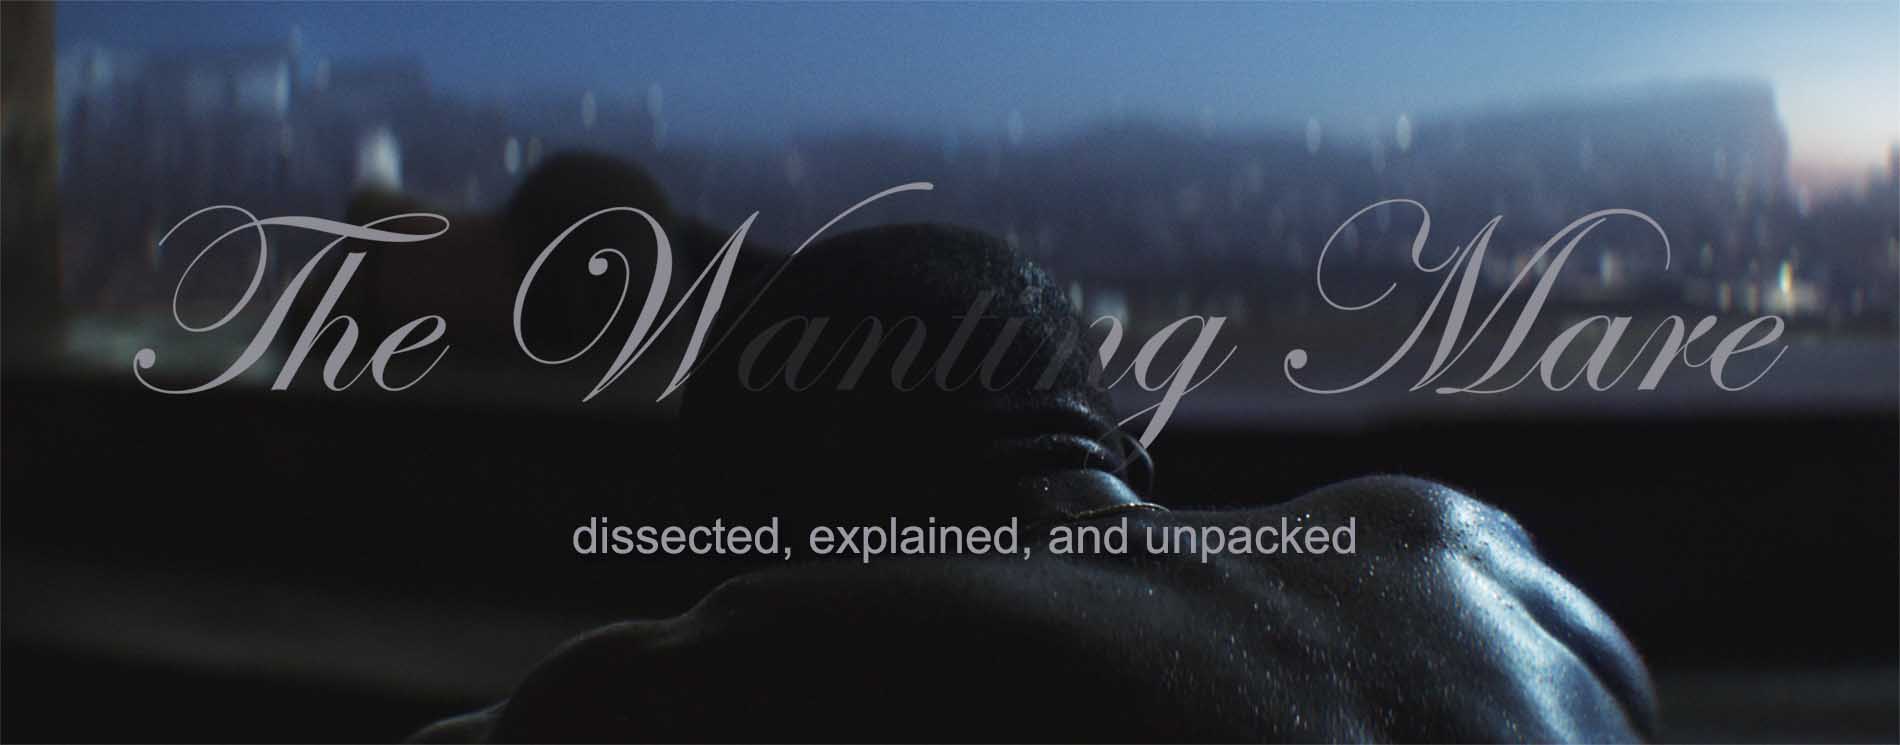 The Wanting Mare Movie Explained and Discussed